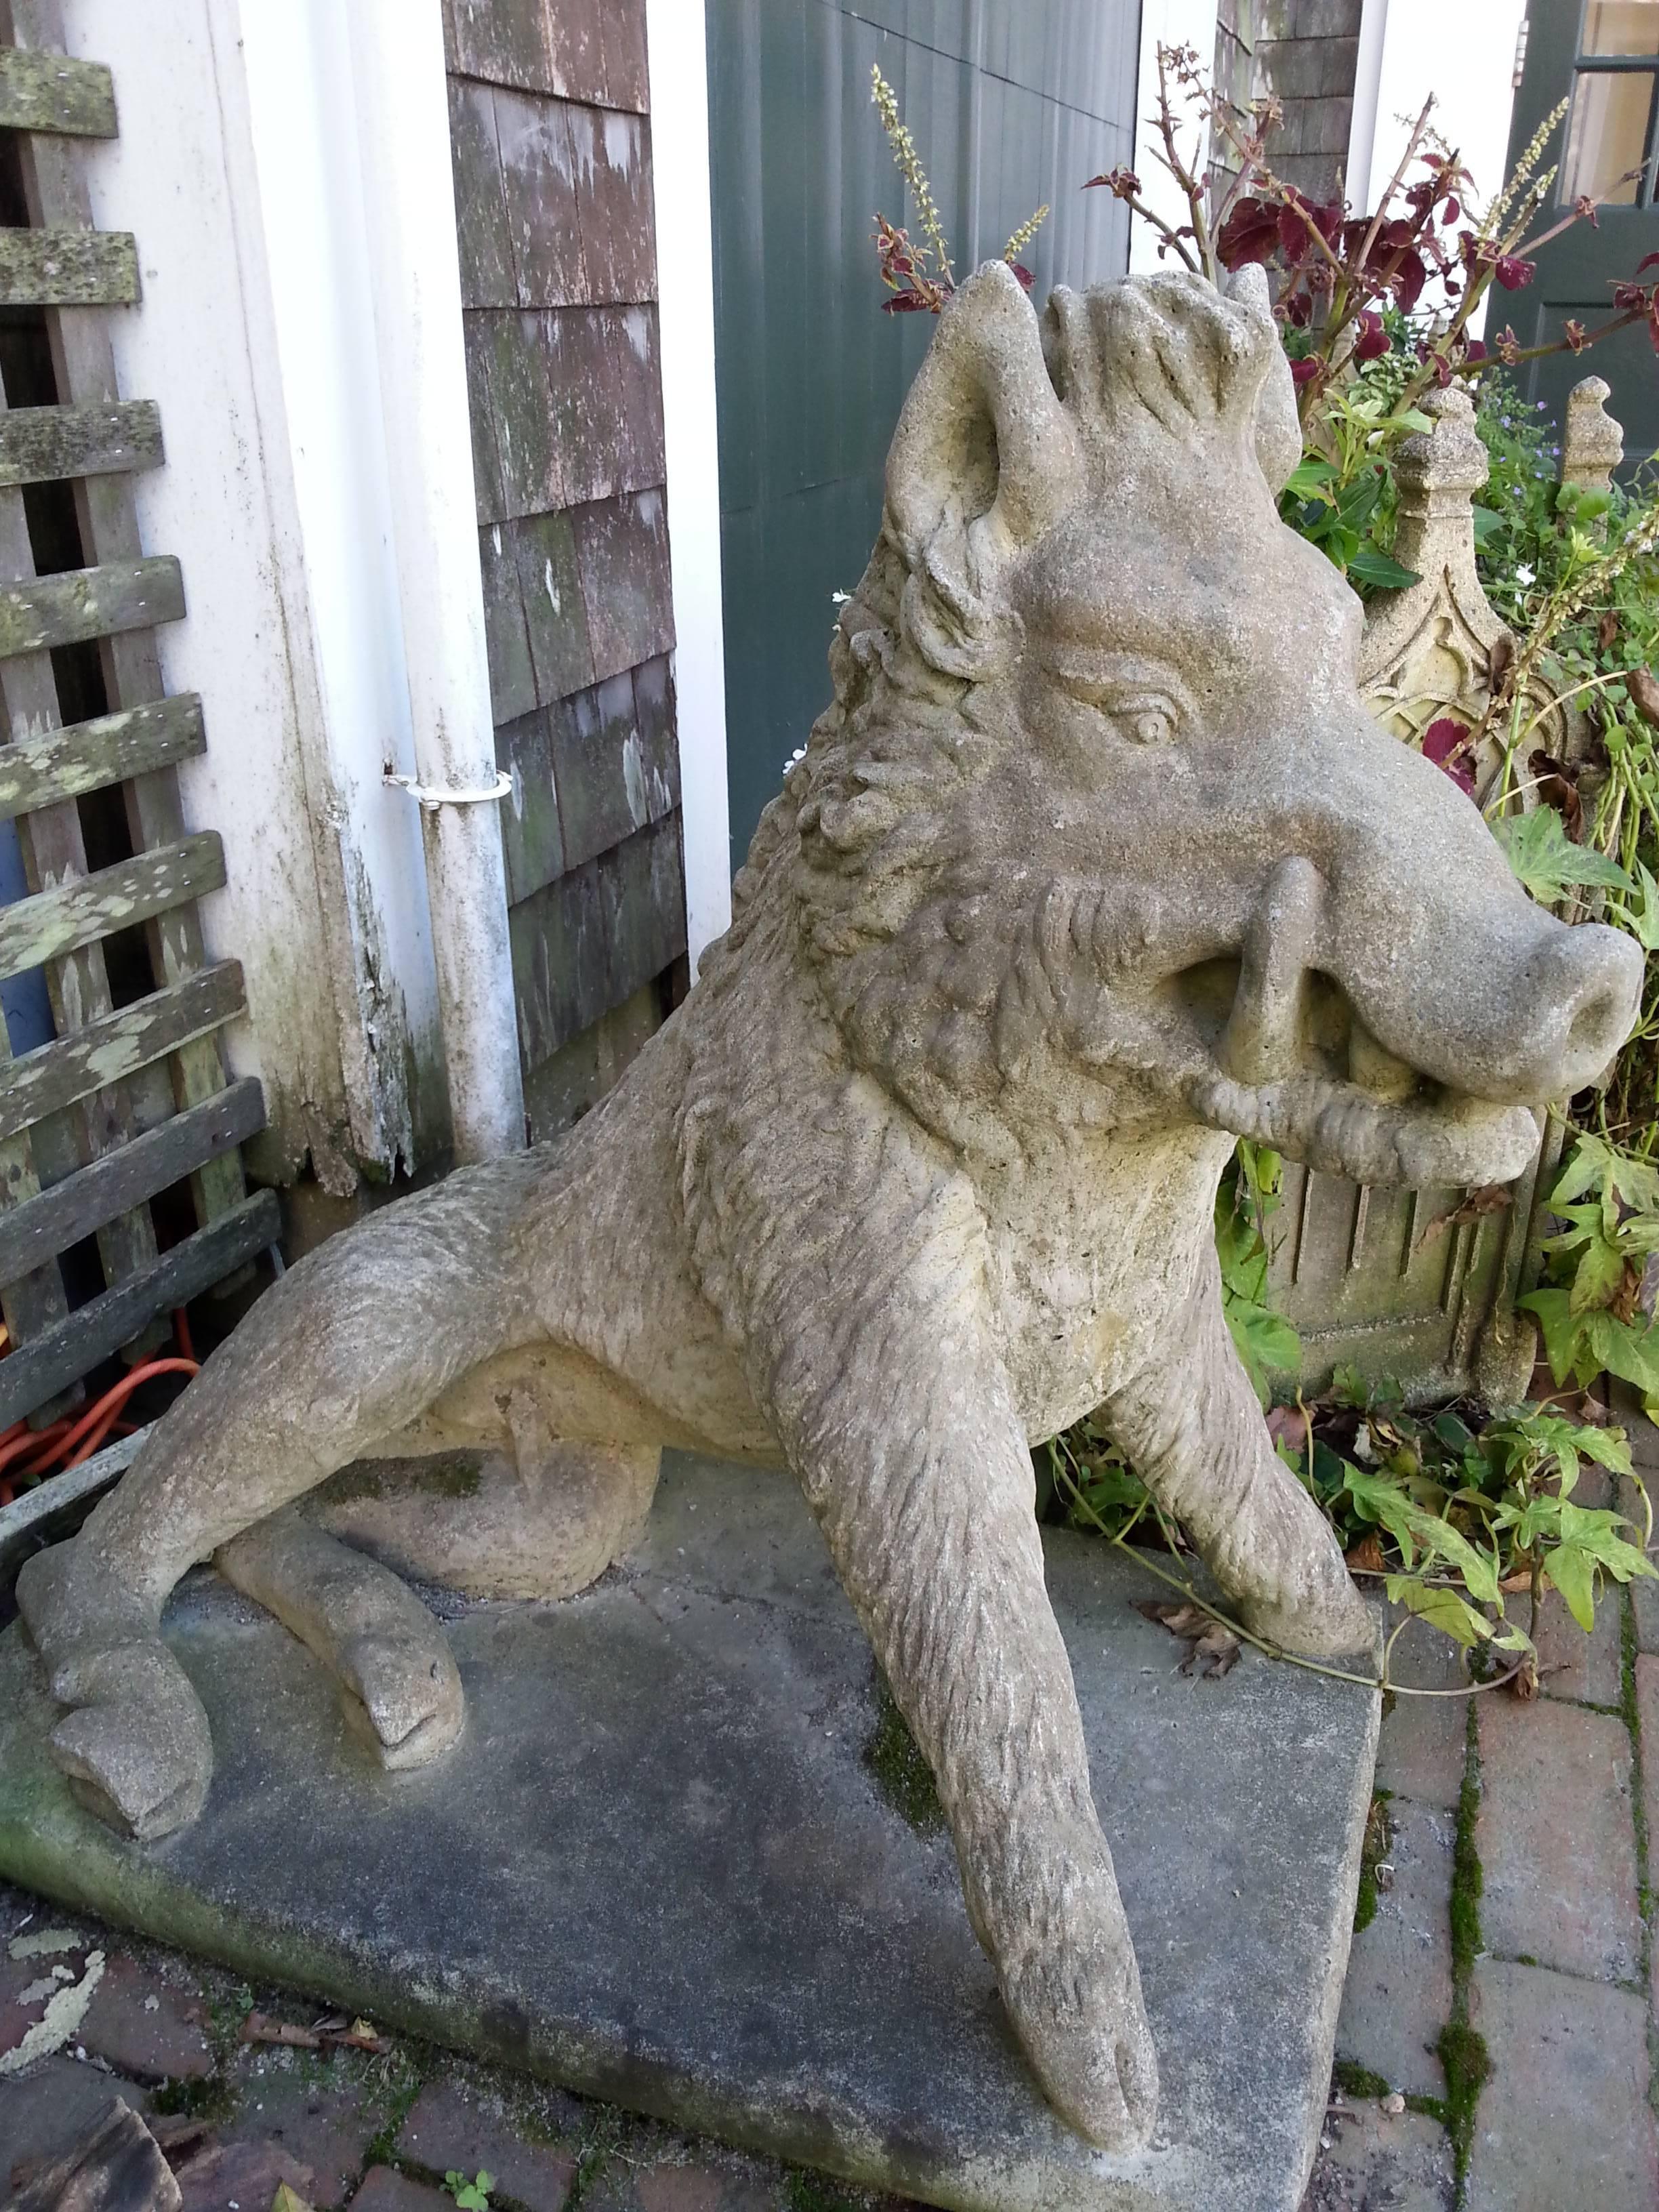 Pair of concrete boars garden statues for outdoor ornamentation.